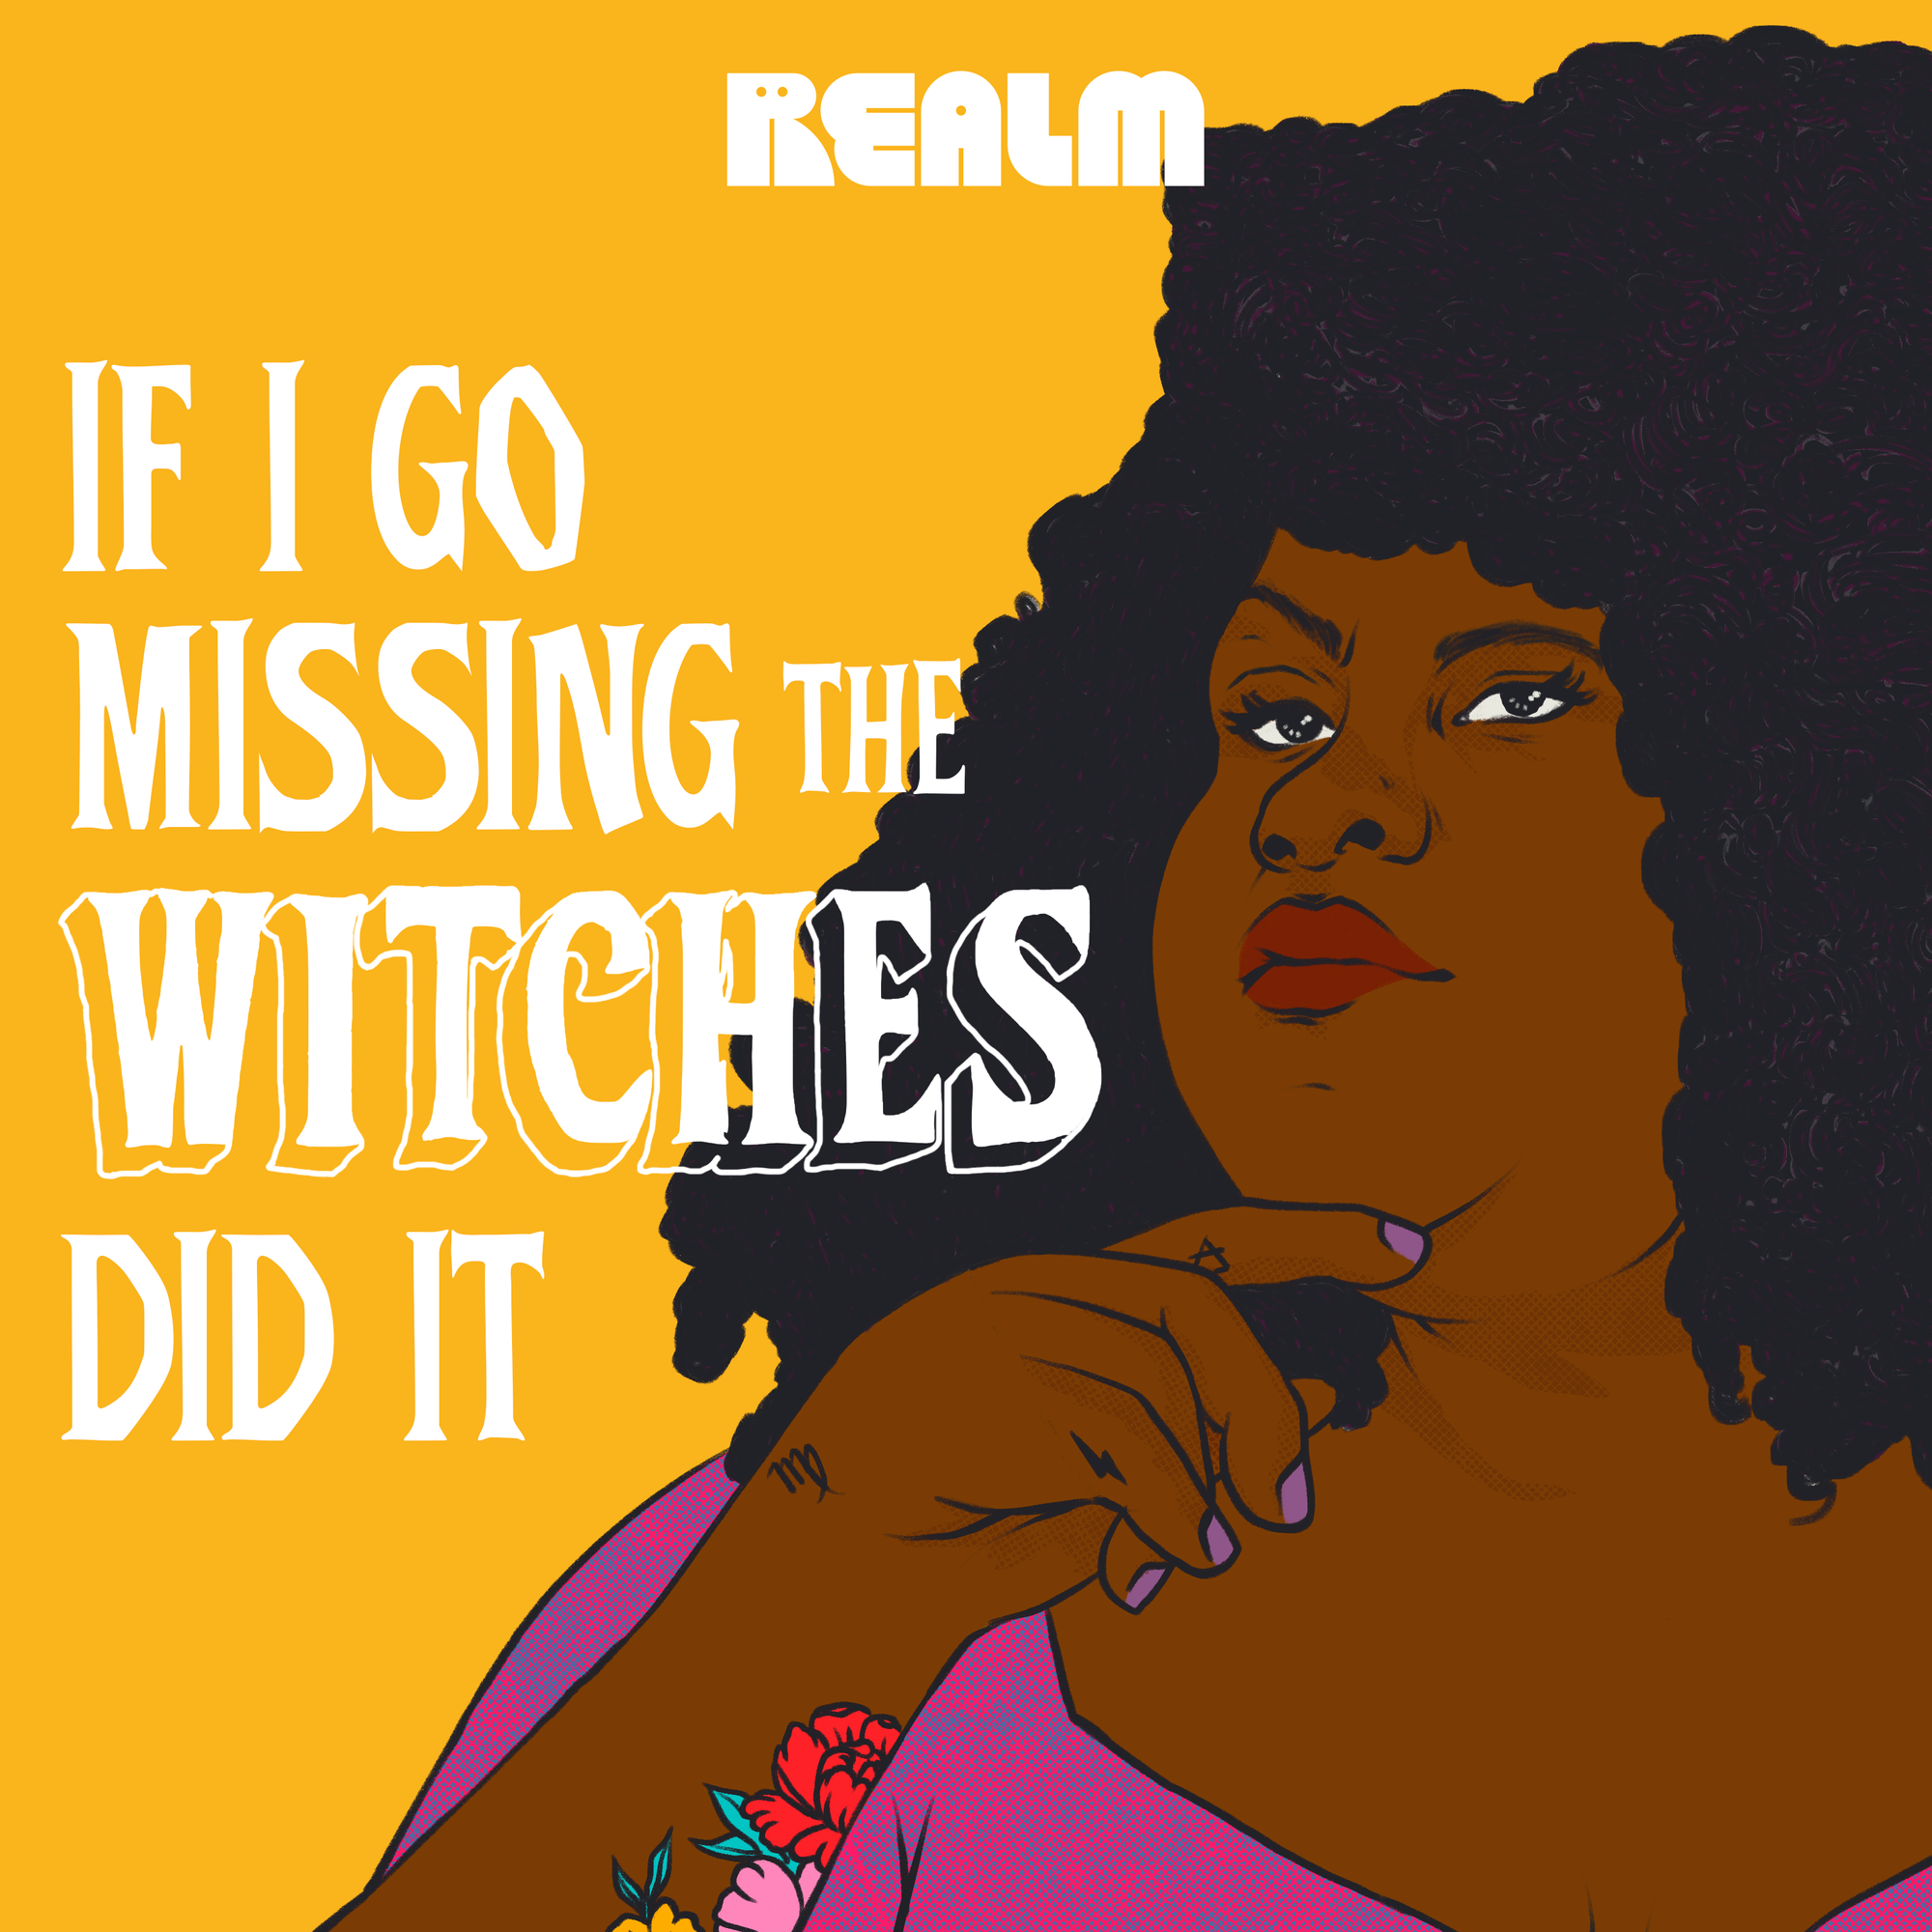  If I Go Missing the Witches Did It cover art from Realm. A fat Black woman gazes pensively away from the camera, one hand held to her chin. She has a gorgeous flower tattoo on her arm, purple nails, and silhouetted large dark natural hair.